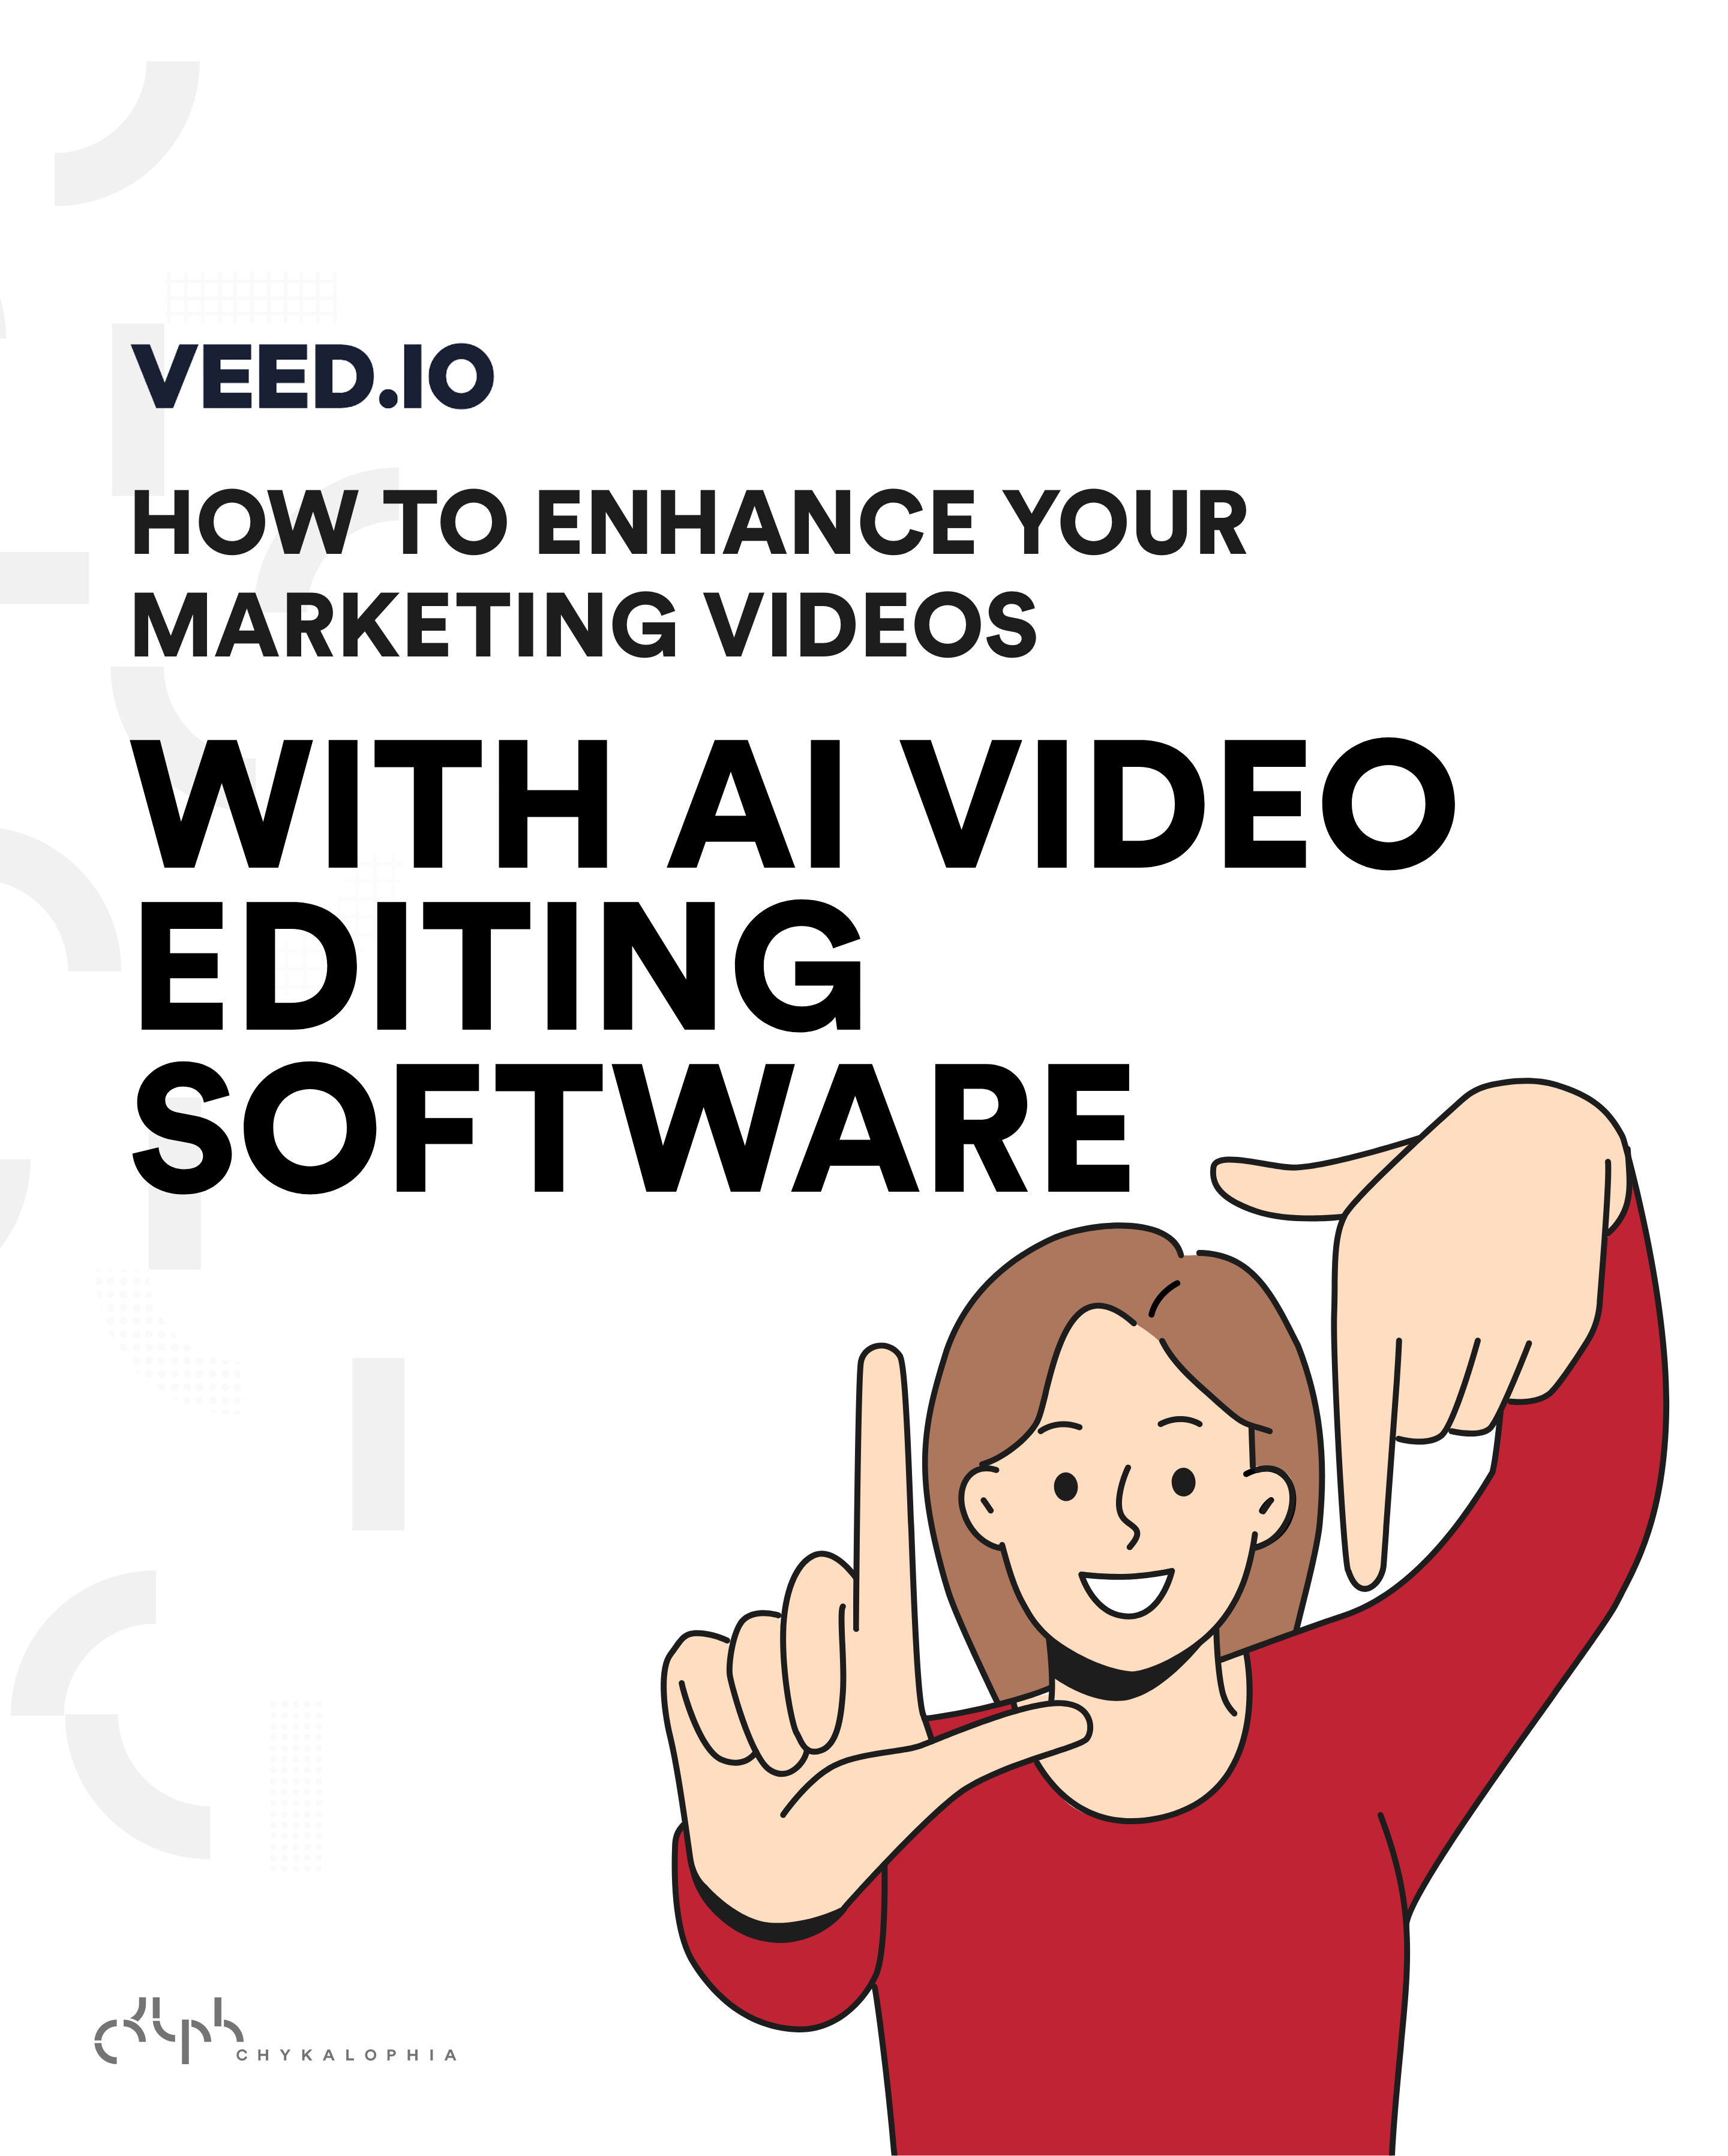 Enhance Your Marketing Videos With AI Video Editing Software - Chykalophia - VEED.io